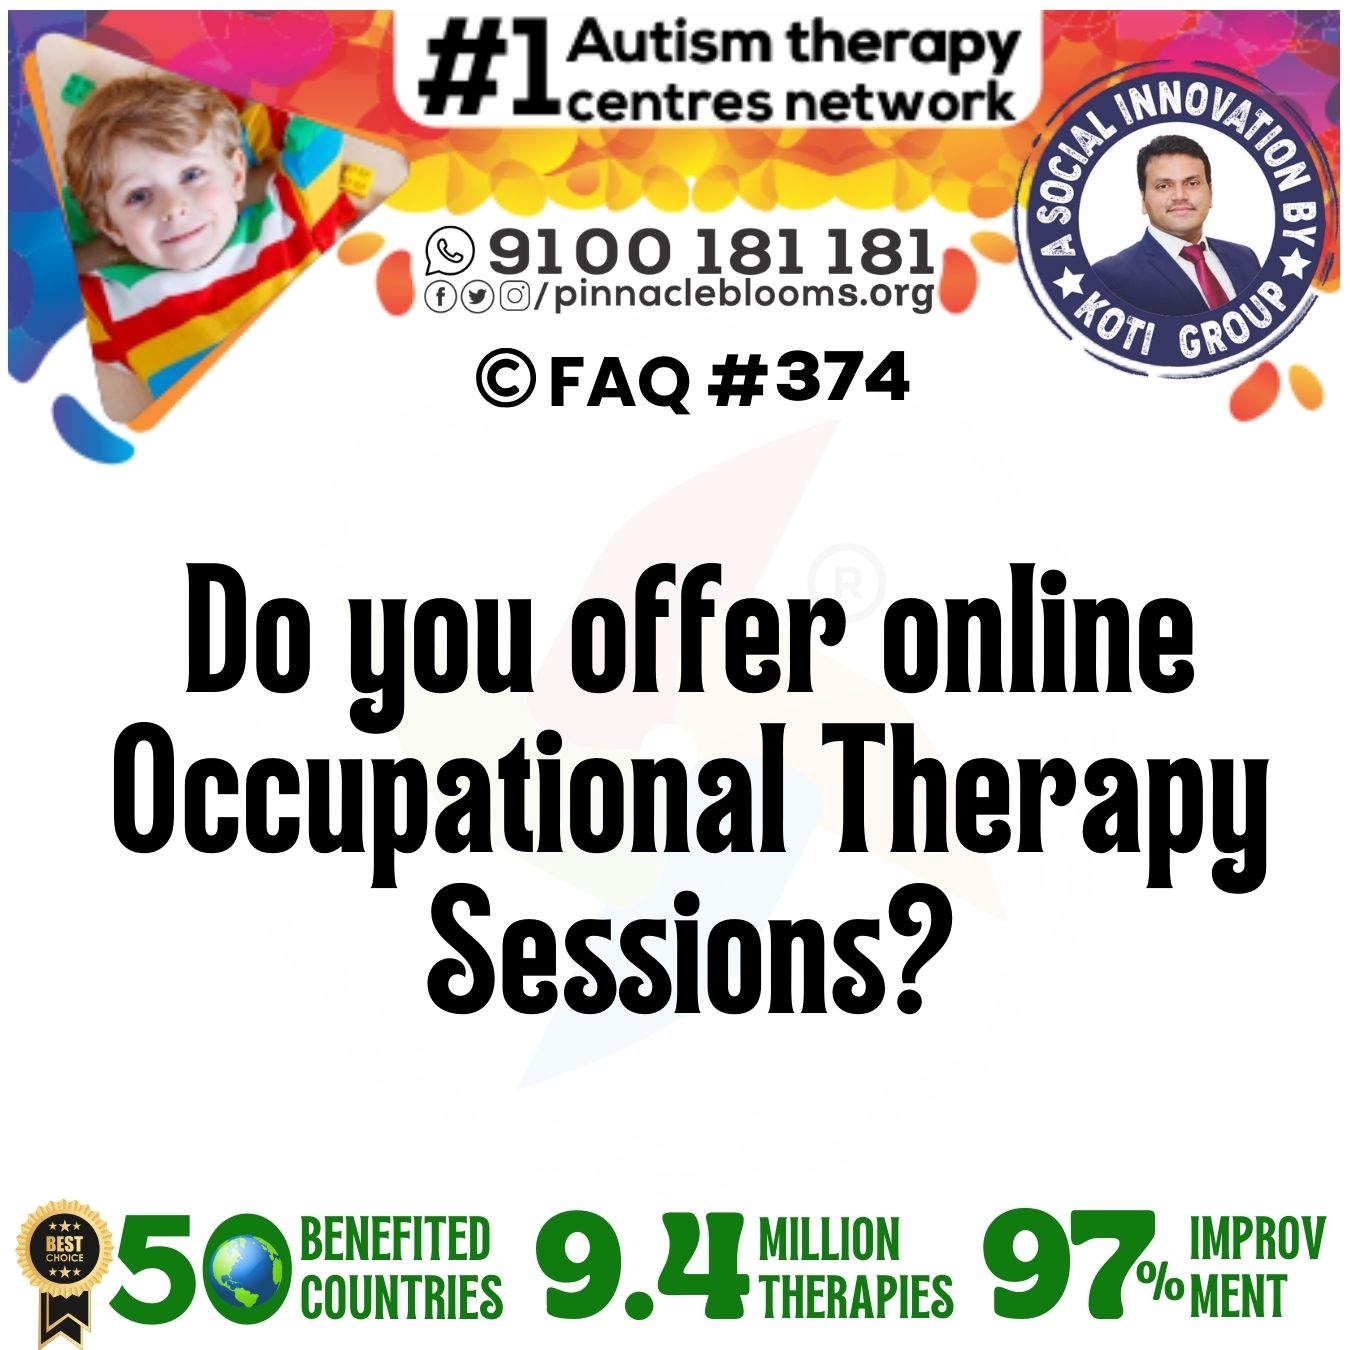 Do you offer online Occupational Therapy Sessions?